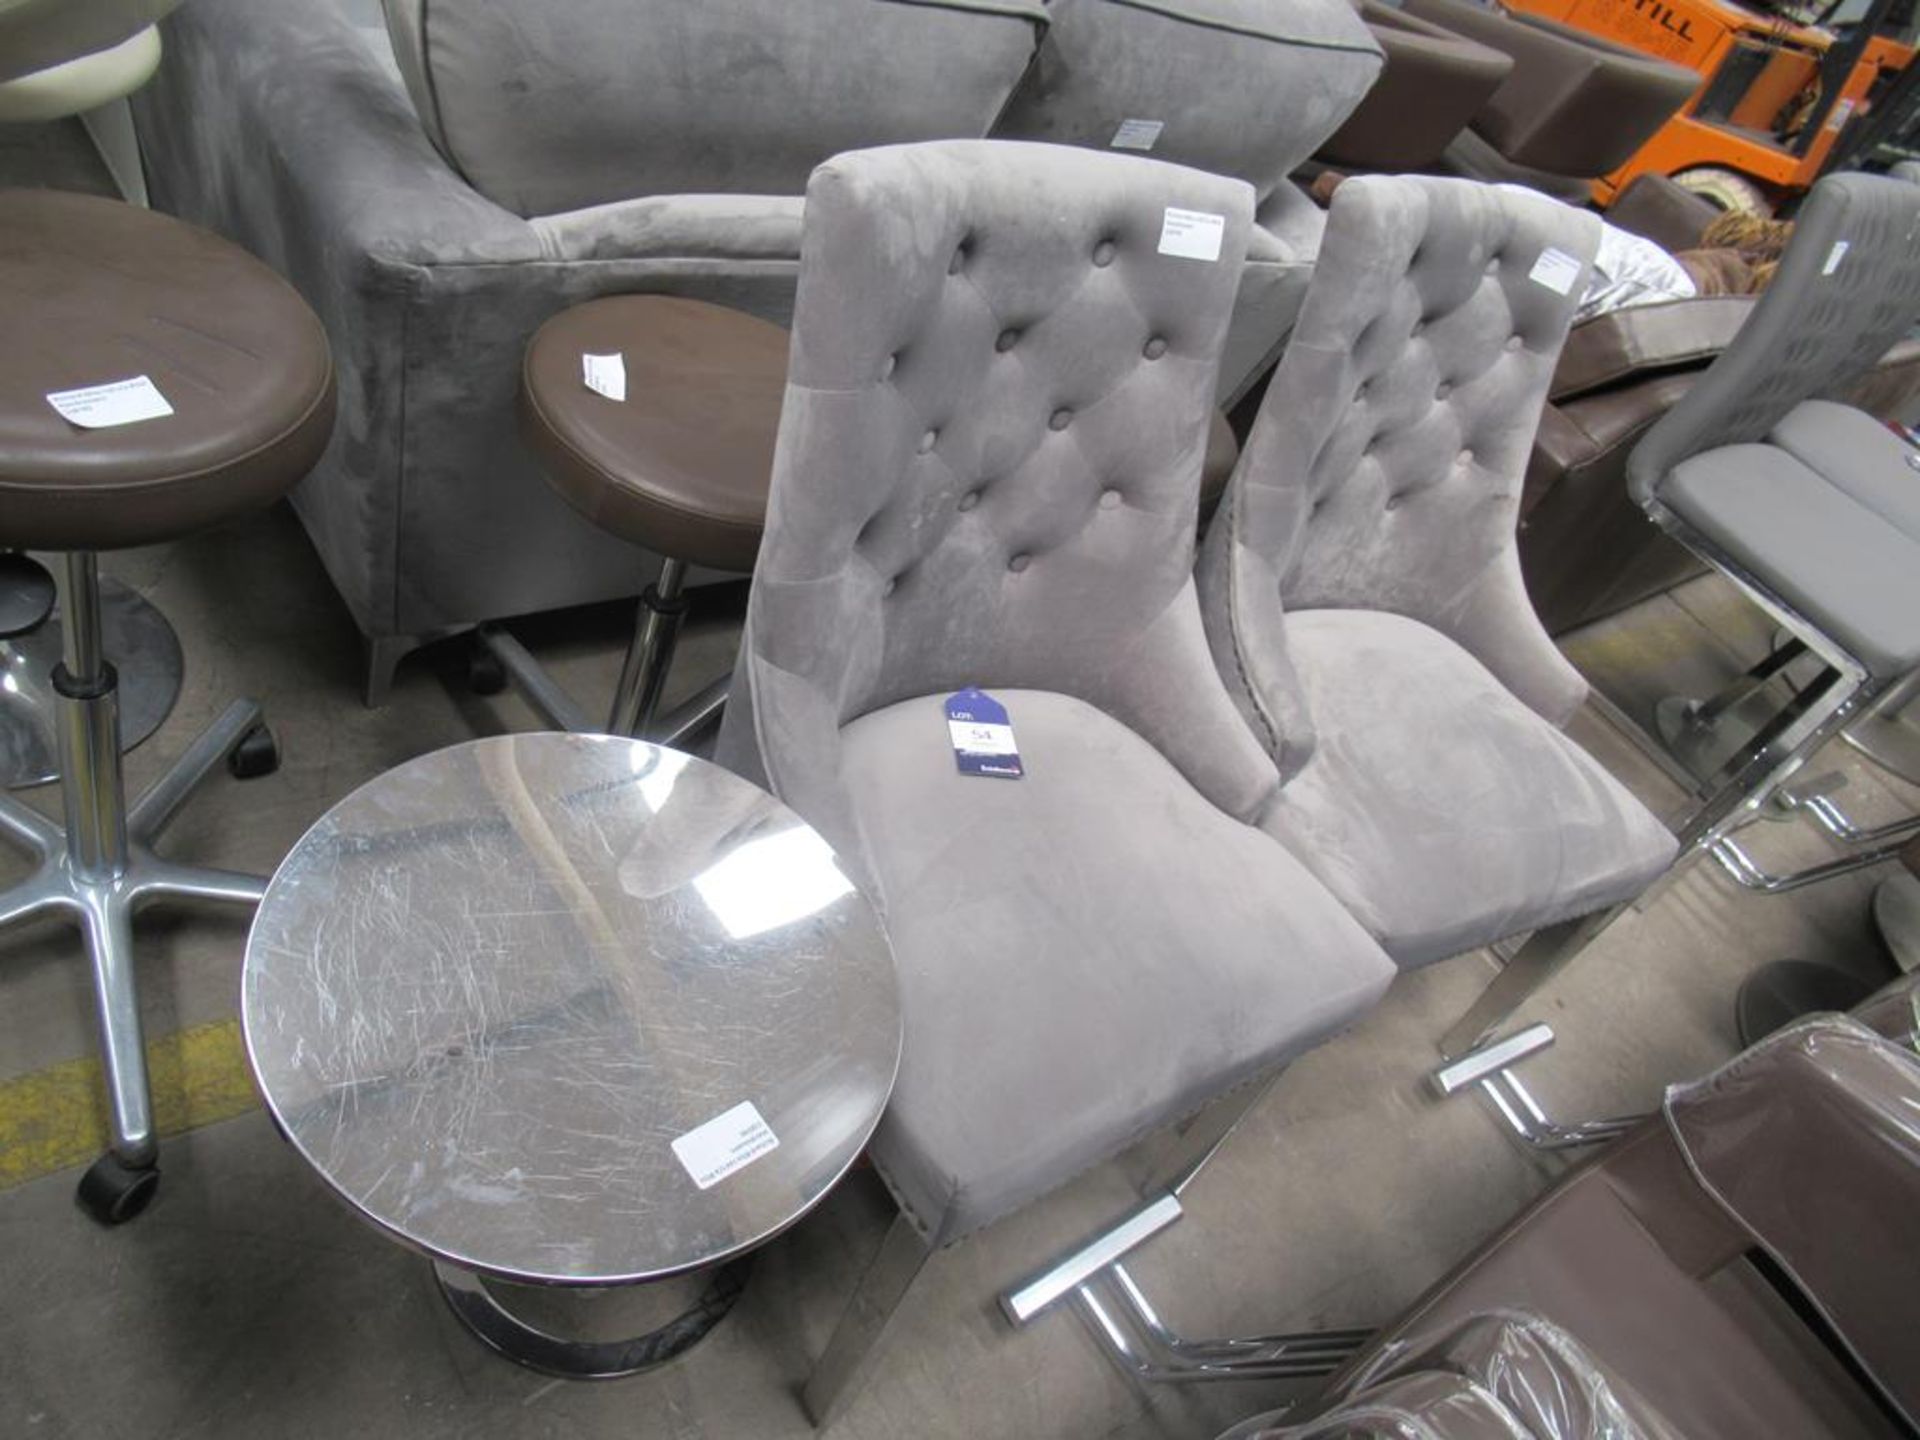 A pair of grey and chrome chairs with table